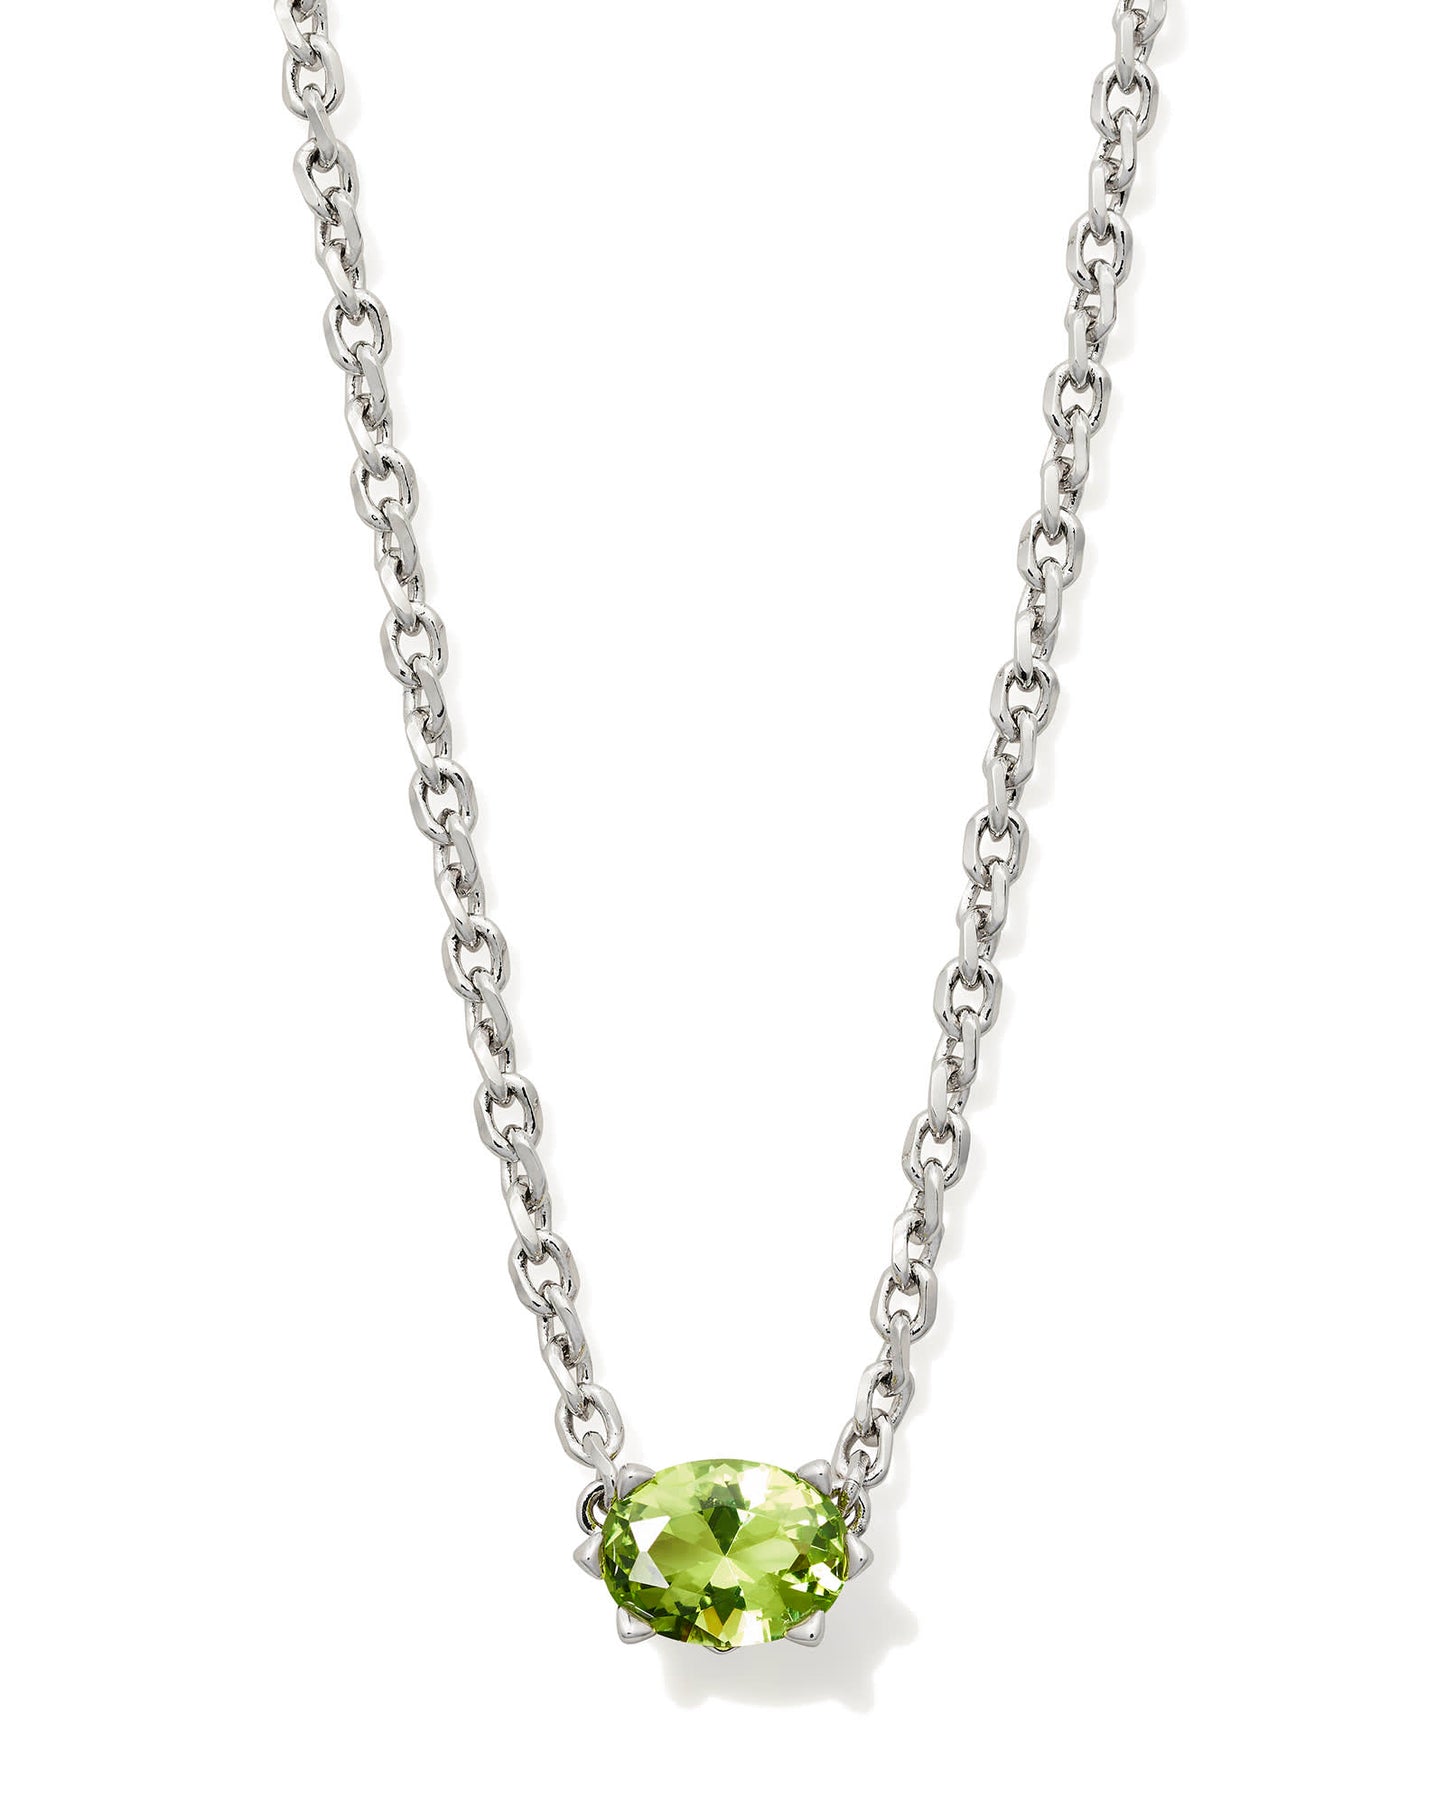 Cailin Silver Pendant Necklace in Green Peridot Crystal